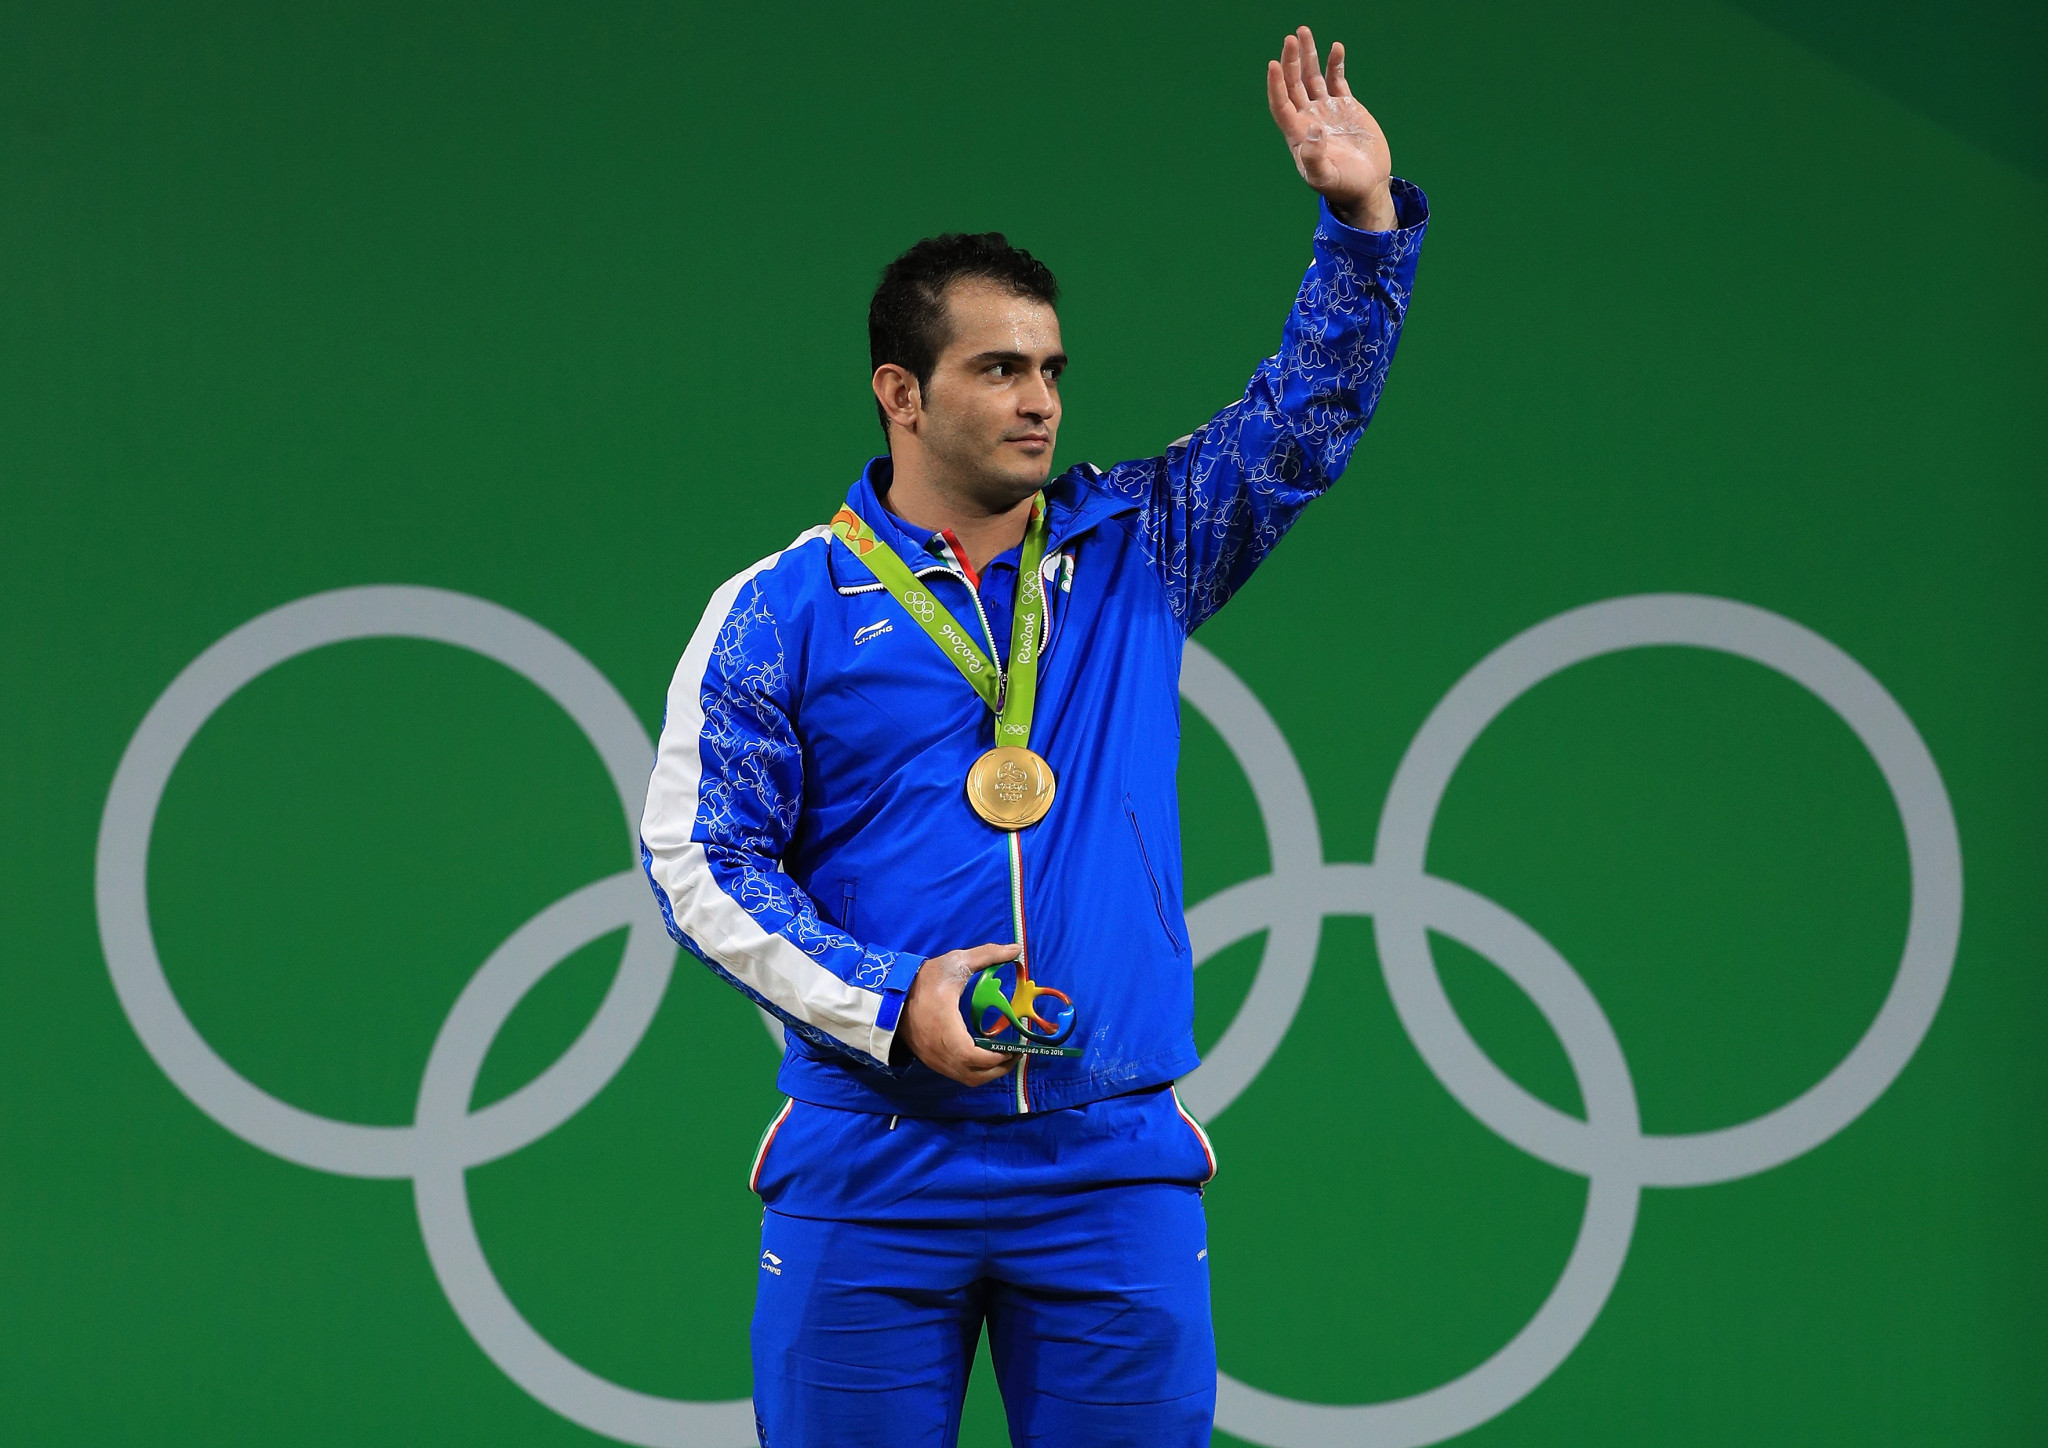 Iran’s 2016 Olympic weightlifting champion Sohrab Moradi joins race for Paris aged 33